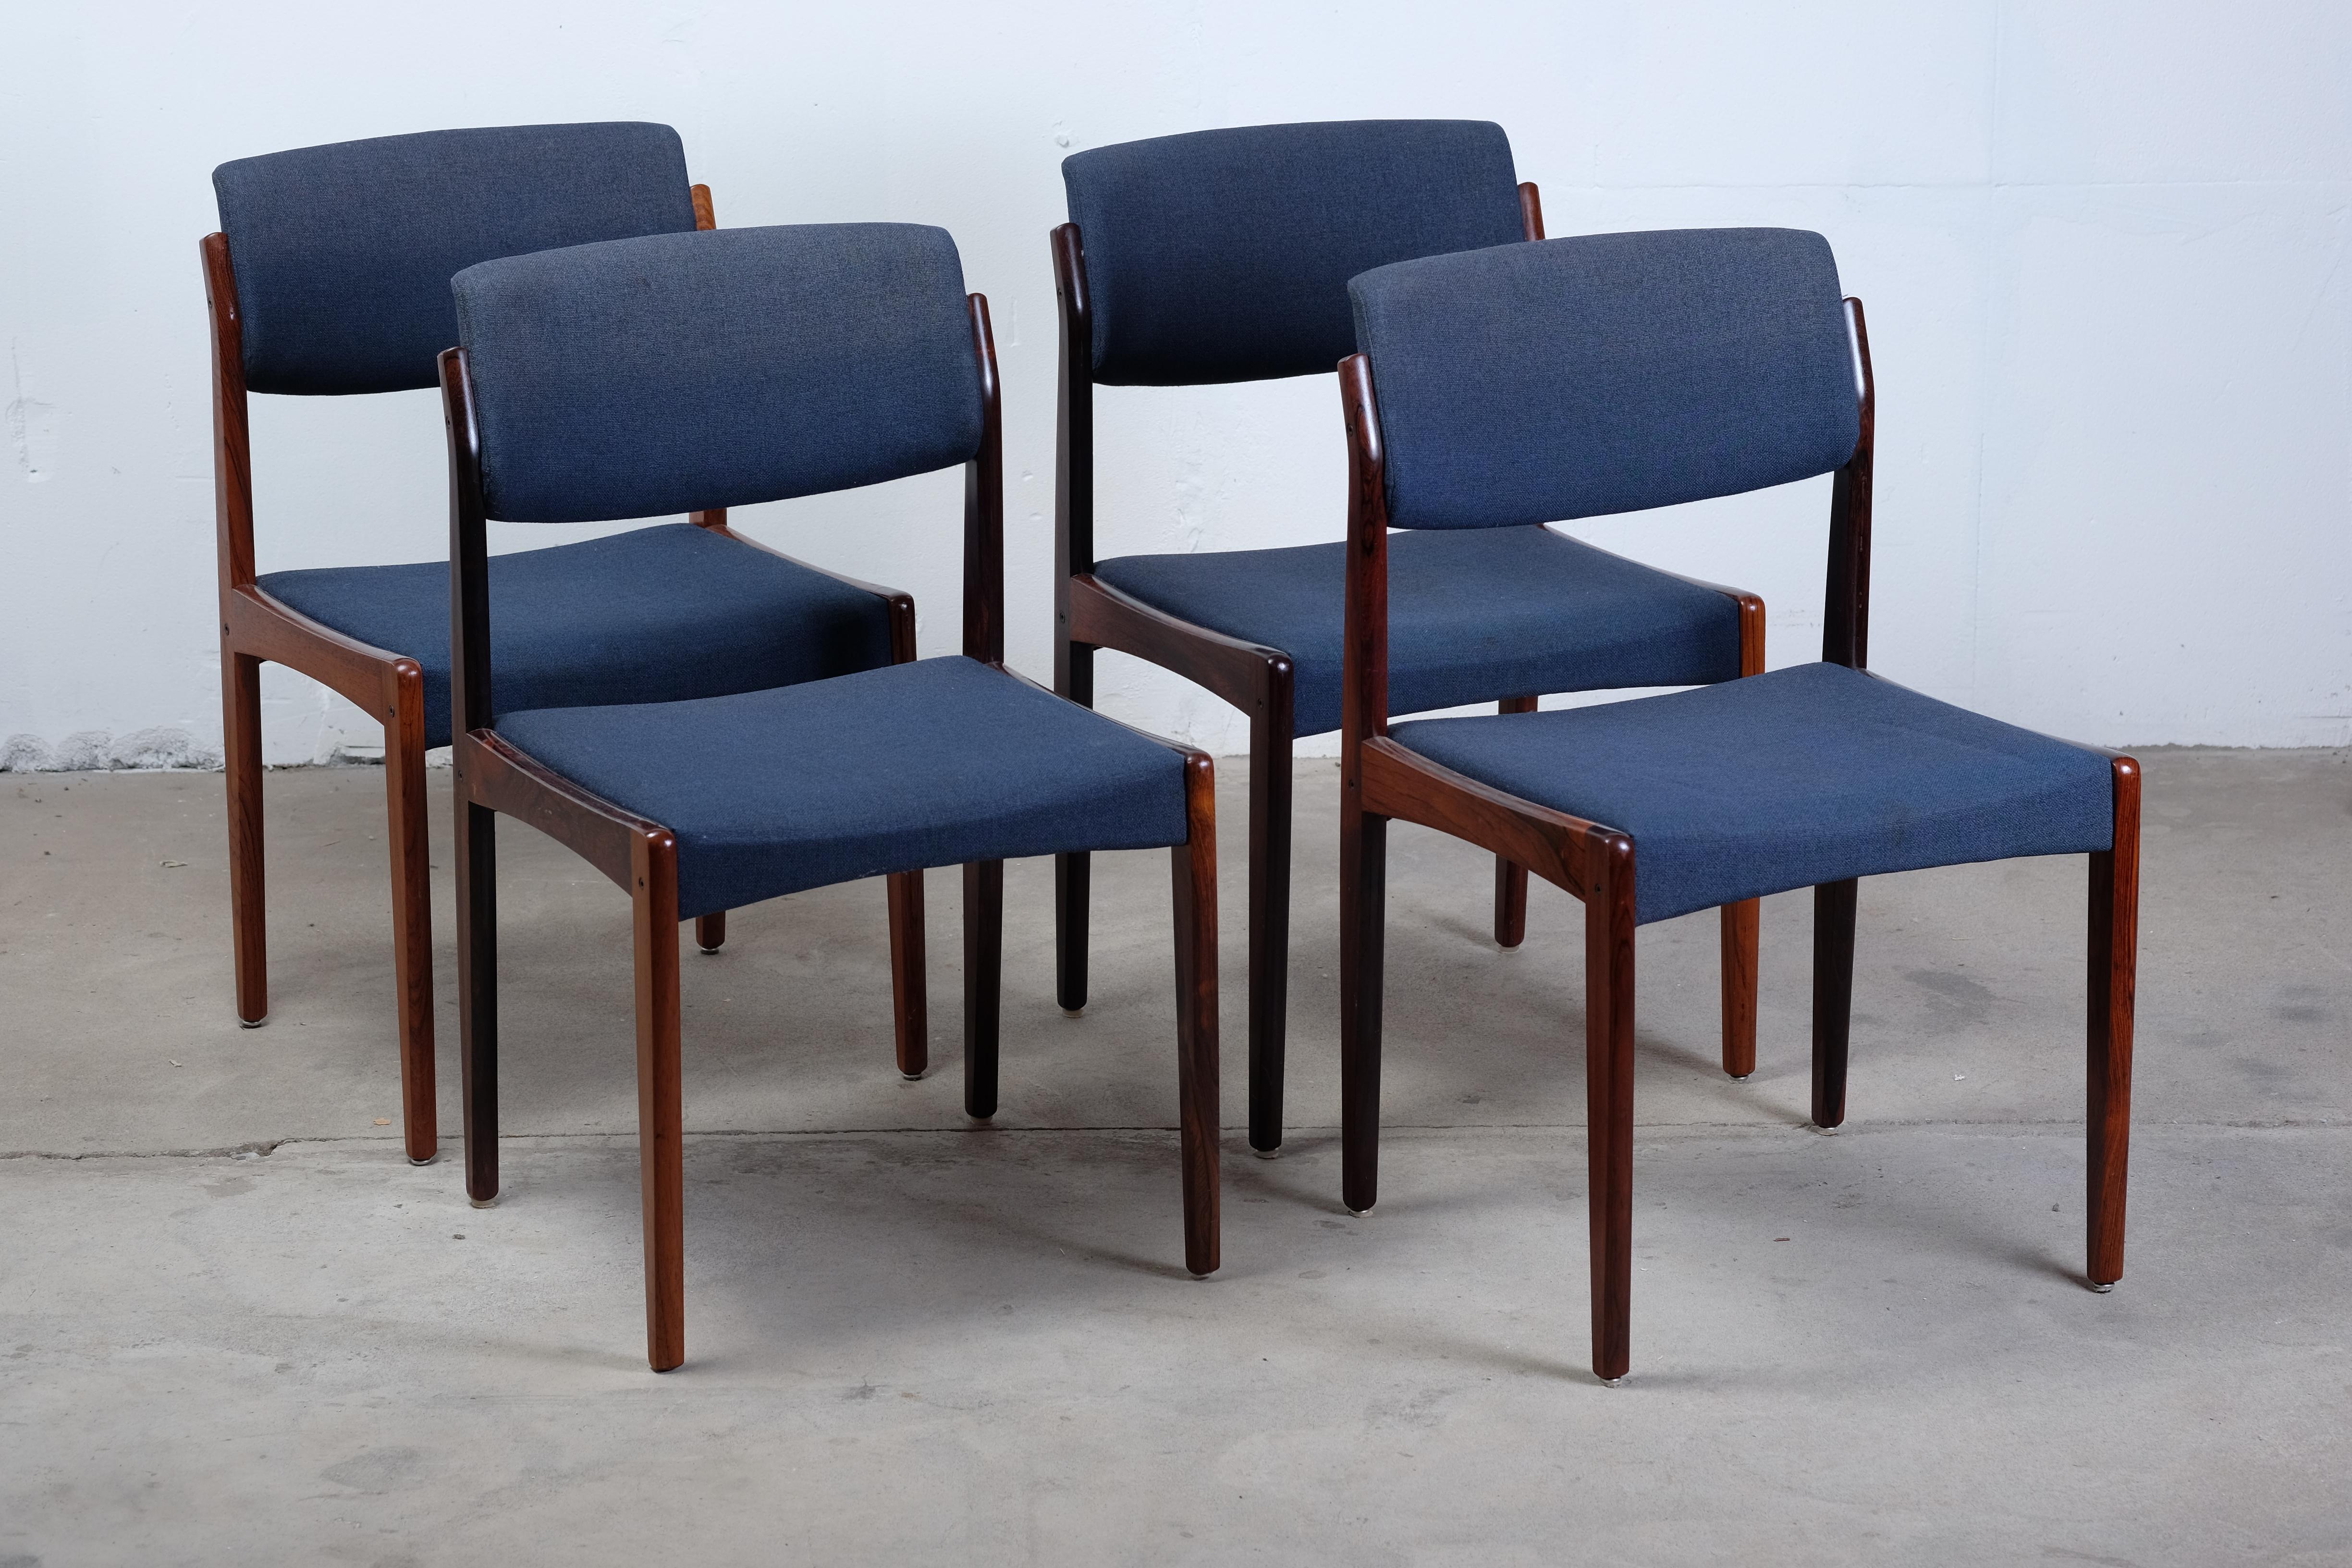 A beautiful set of four rosewood dining chairs by H.W. Klein for Bramin. H.W Klein's pieces for Bramin tend to feature really high standards of material quality. This chairs entire frame is made of solid rosewood, the backrest is upholstered making